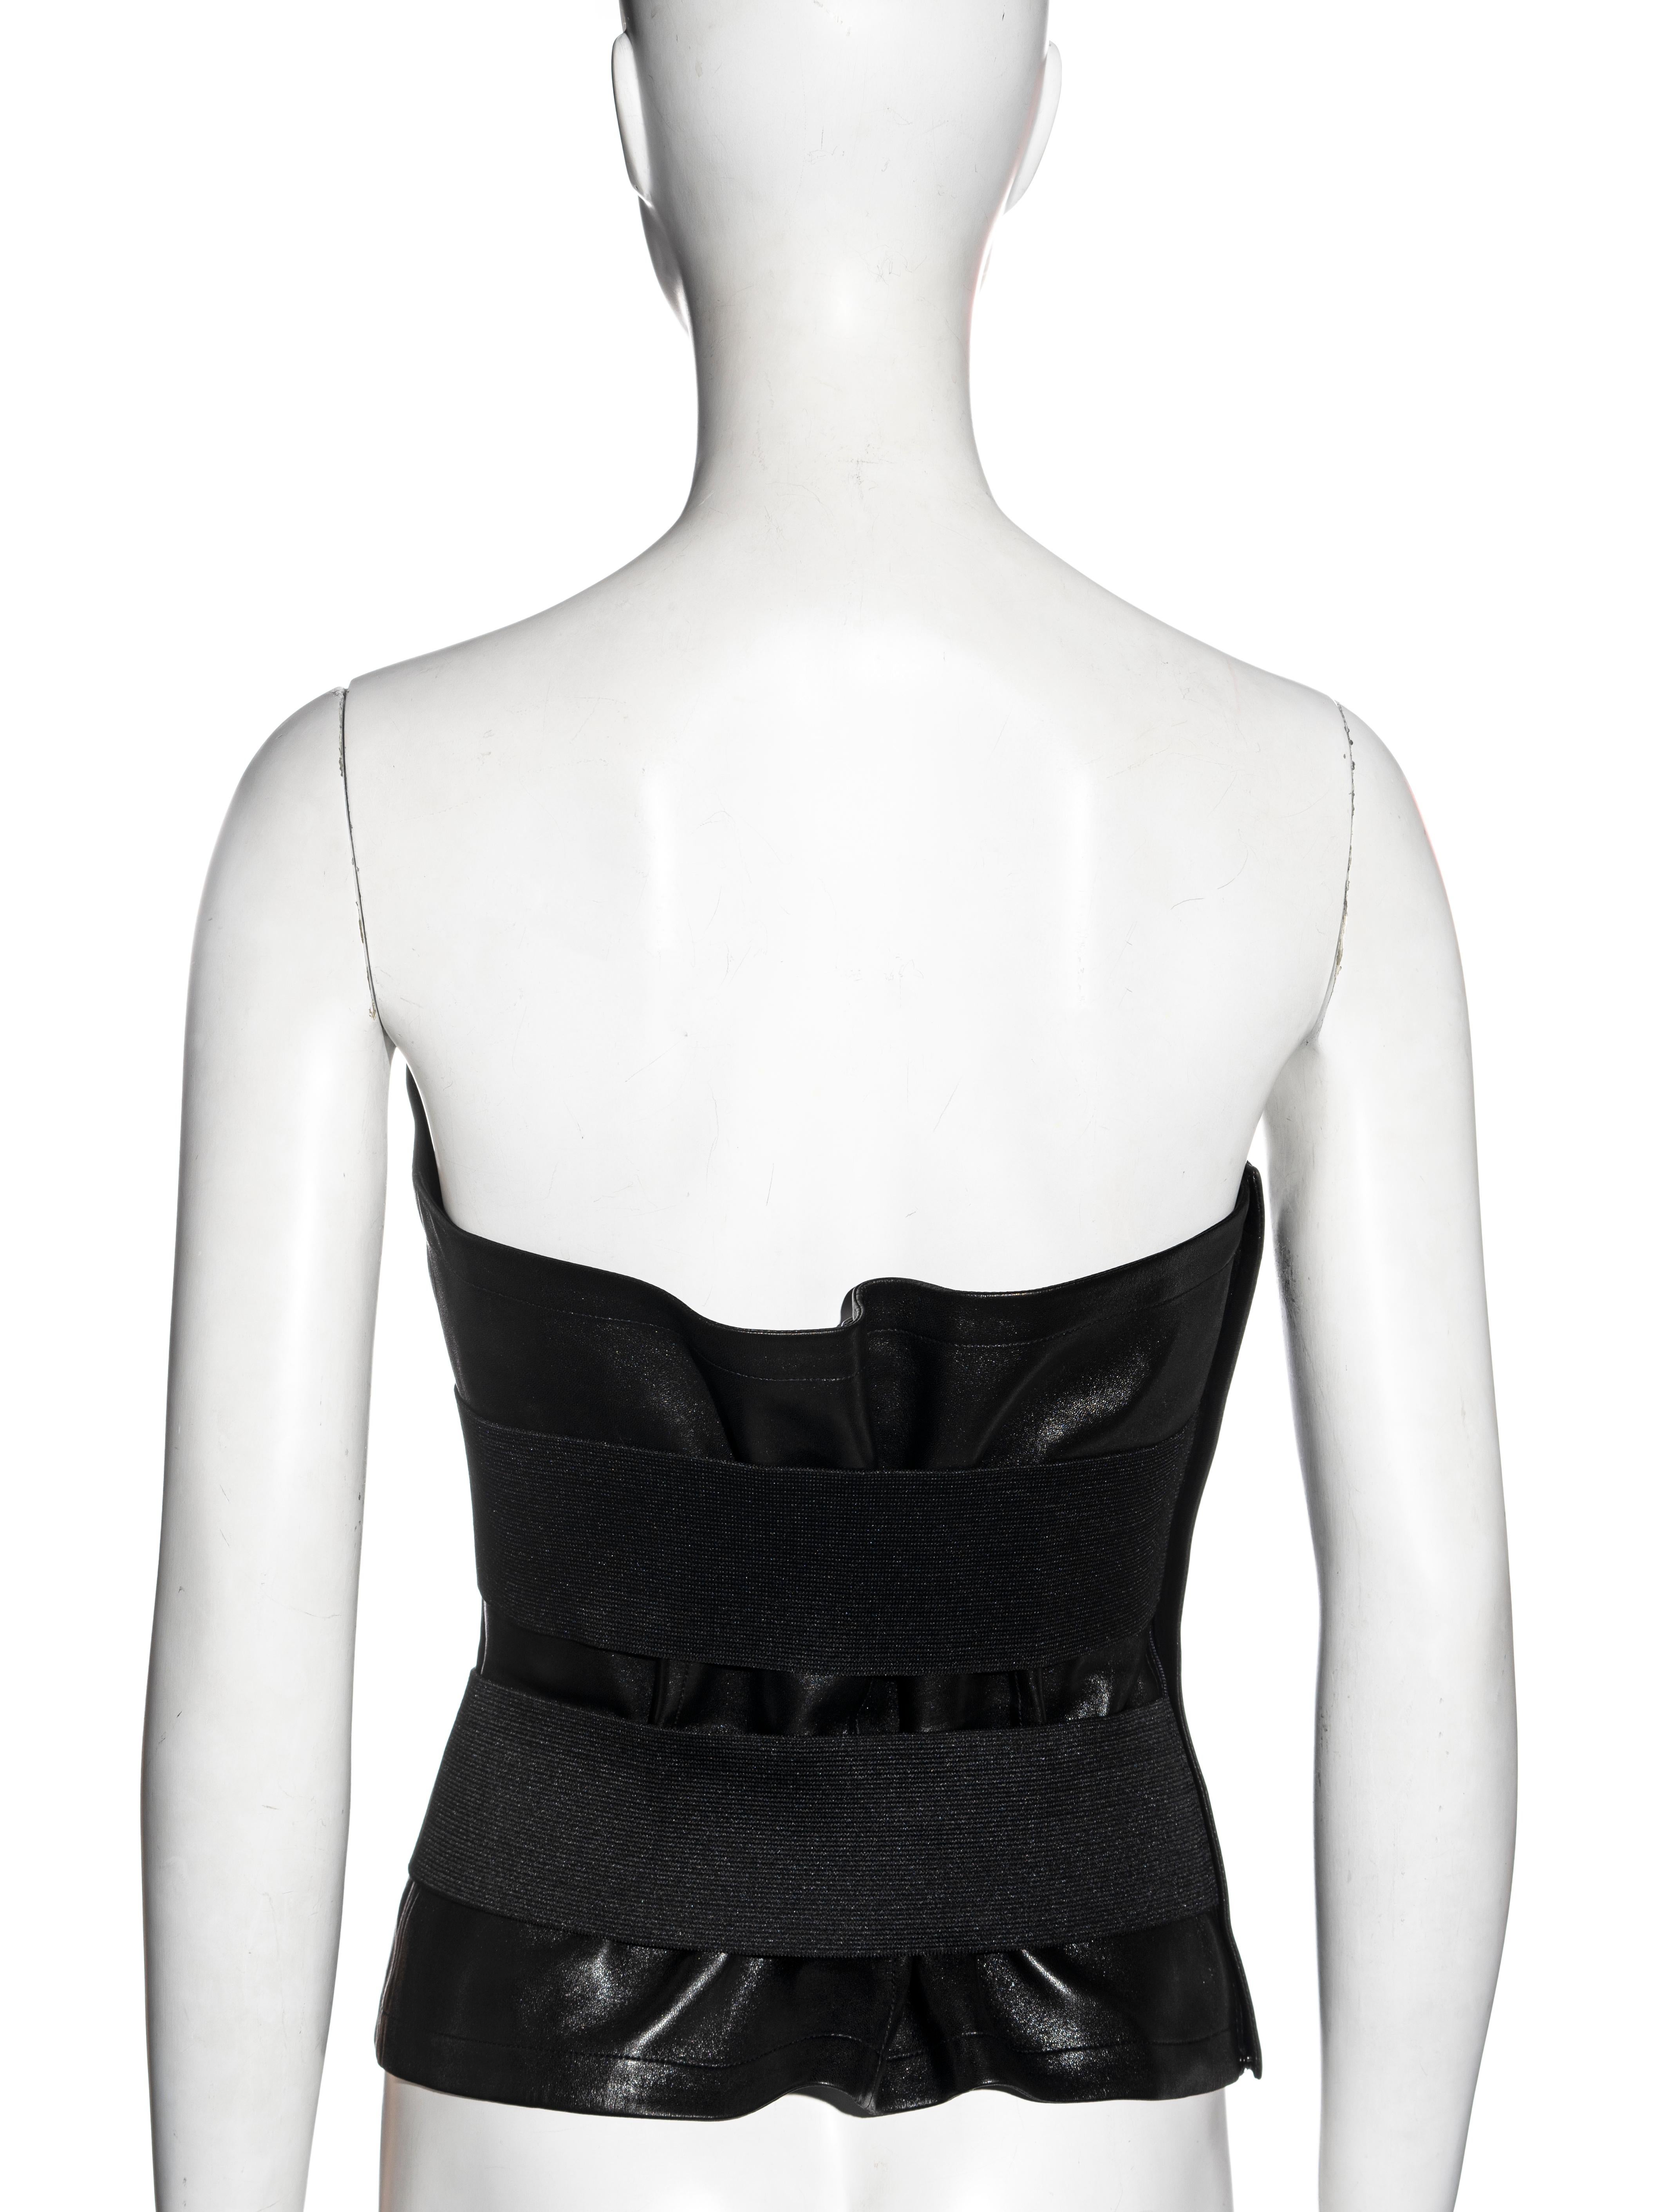 Women's Yves Saint Laurent by Tom Ford black leather strapless wrap corset, ss 2001